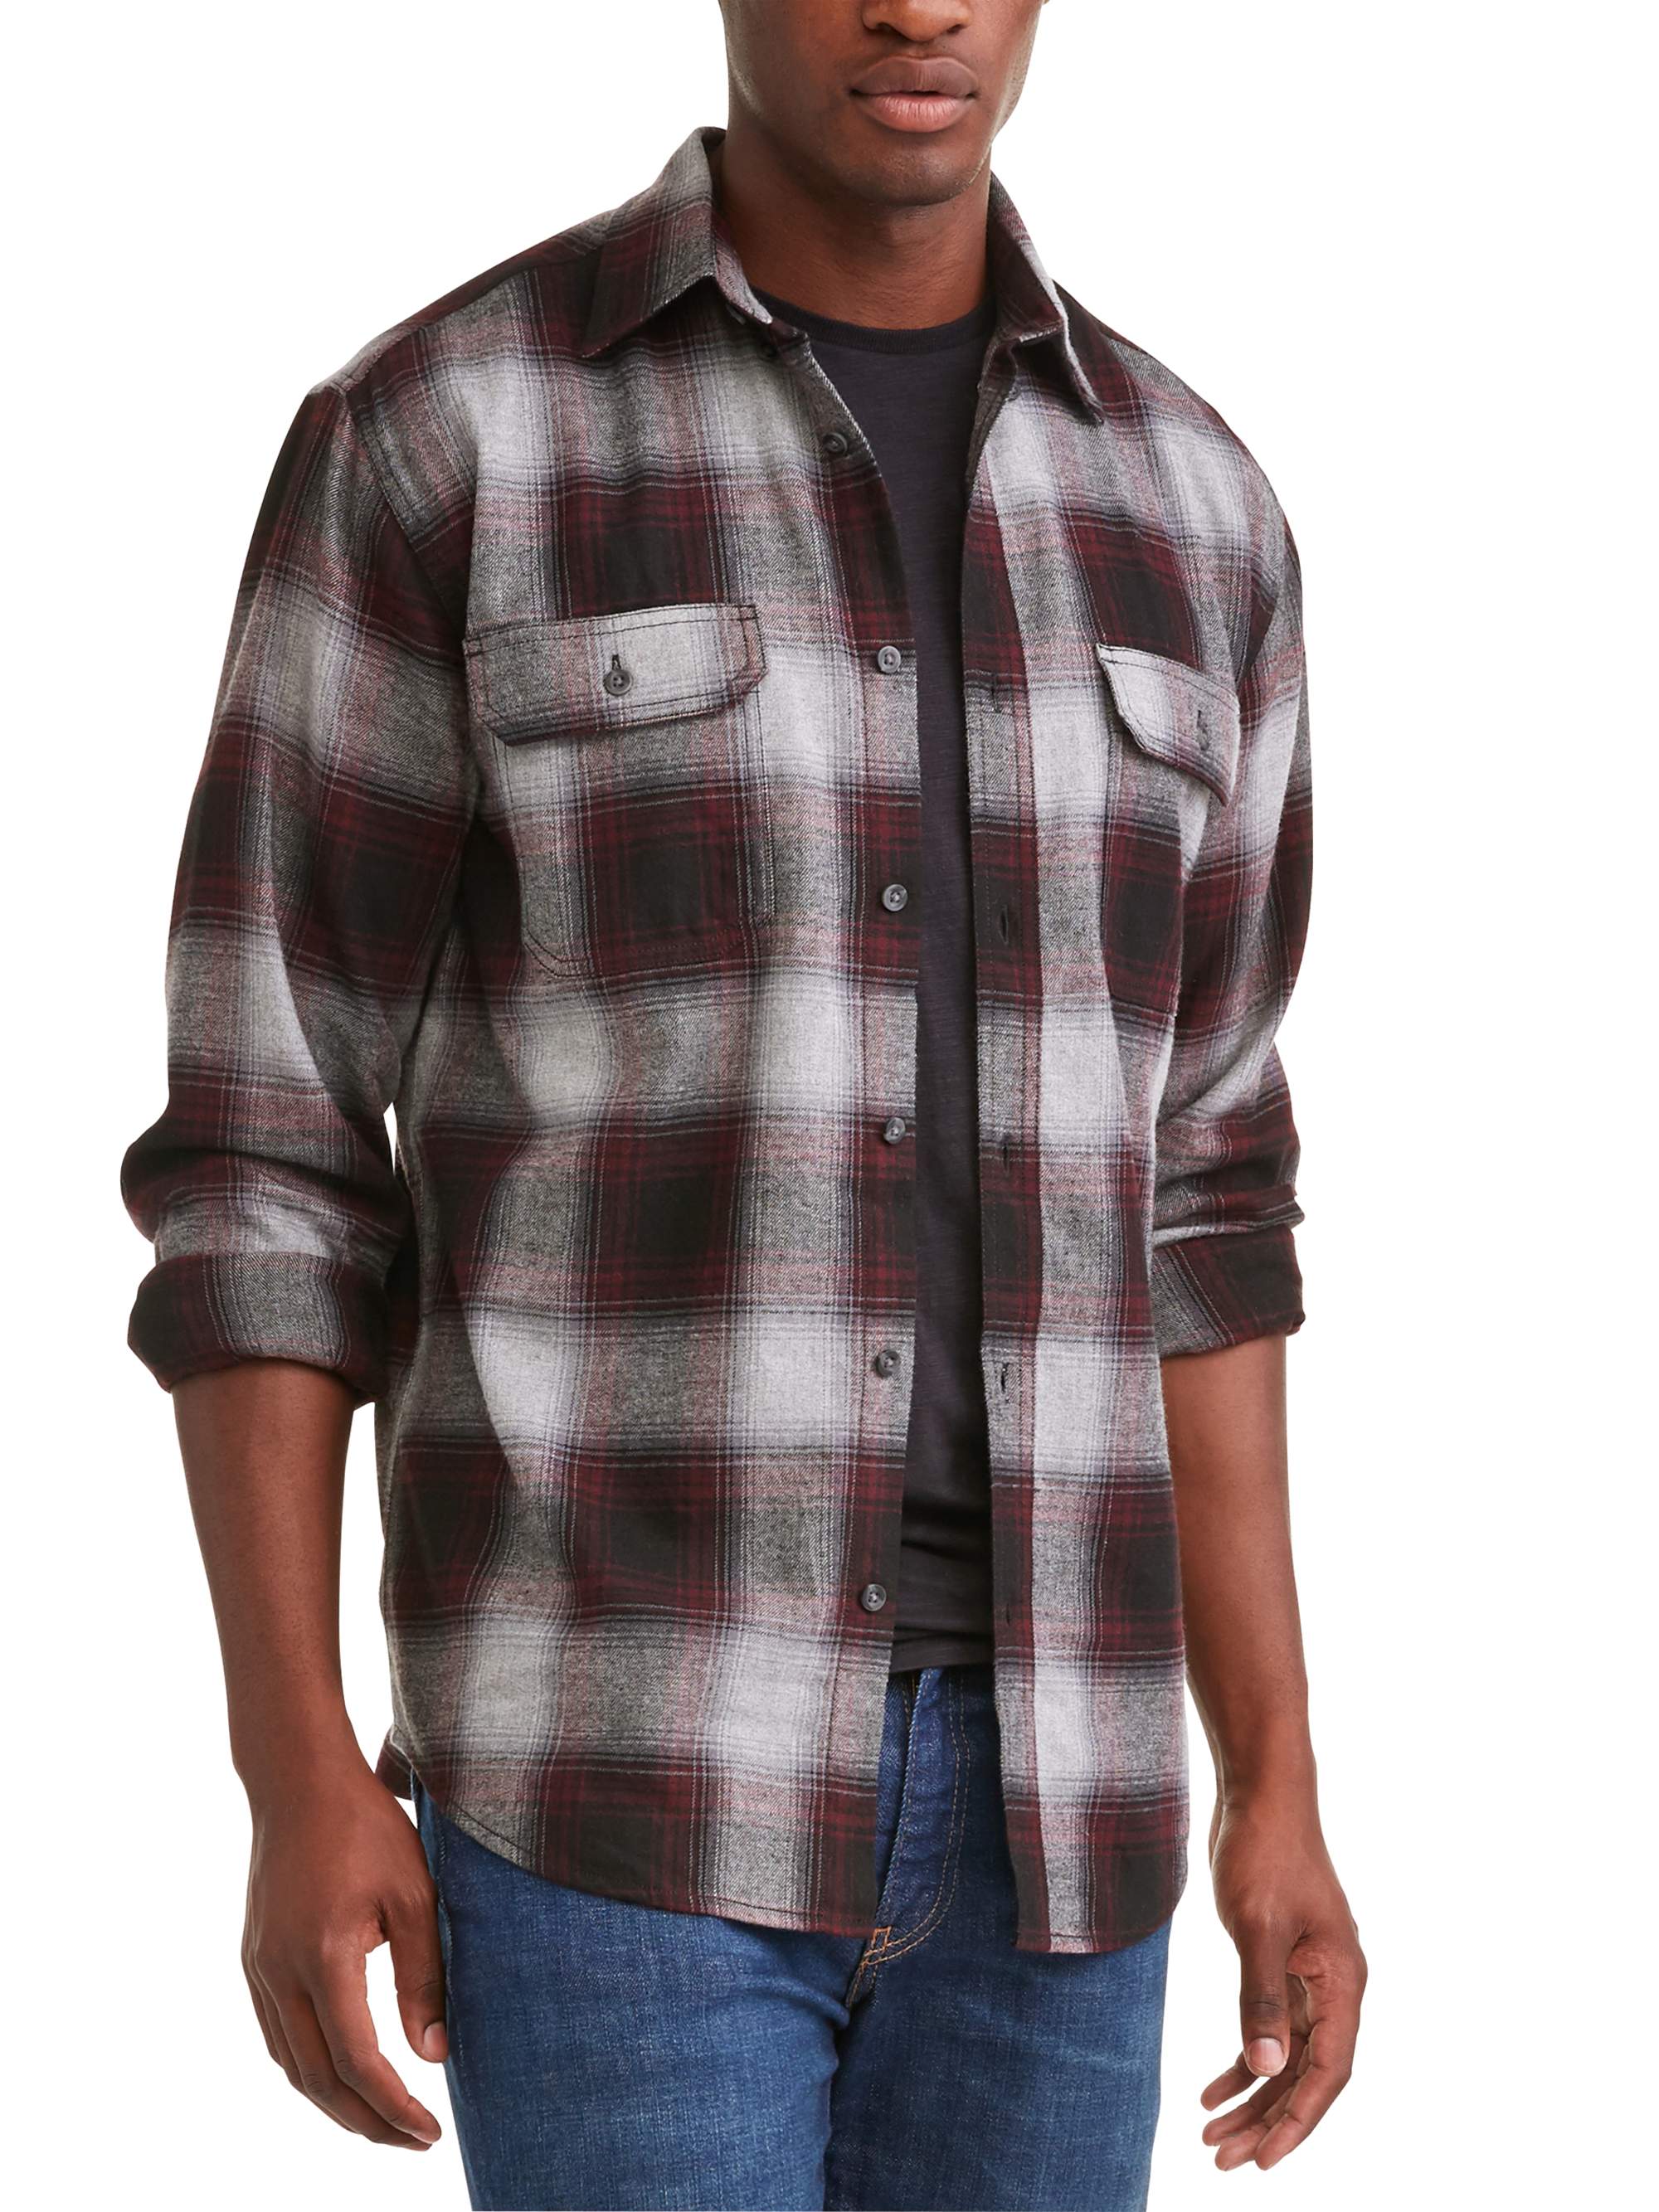 Men's Long Sleeve Flannel Shirt, Up To 5XL - image 1 of 2